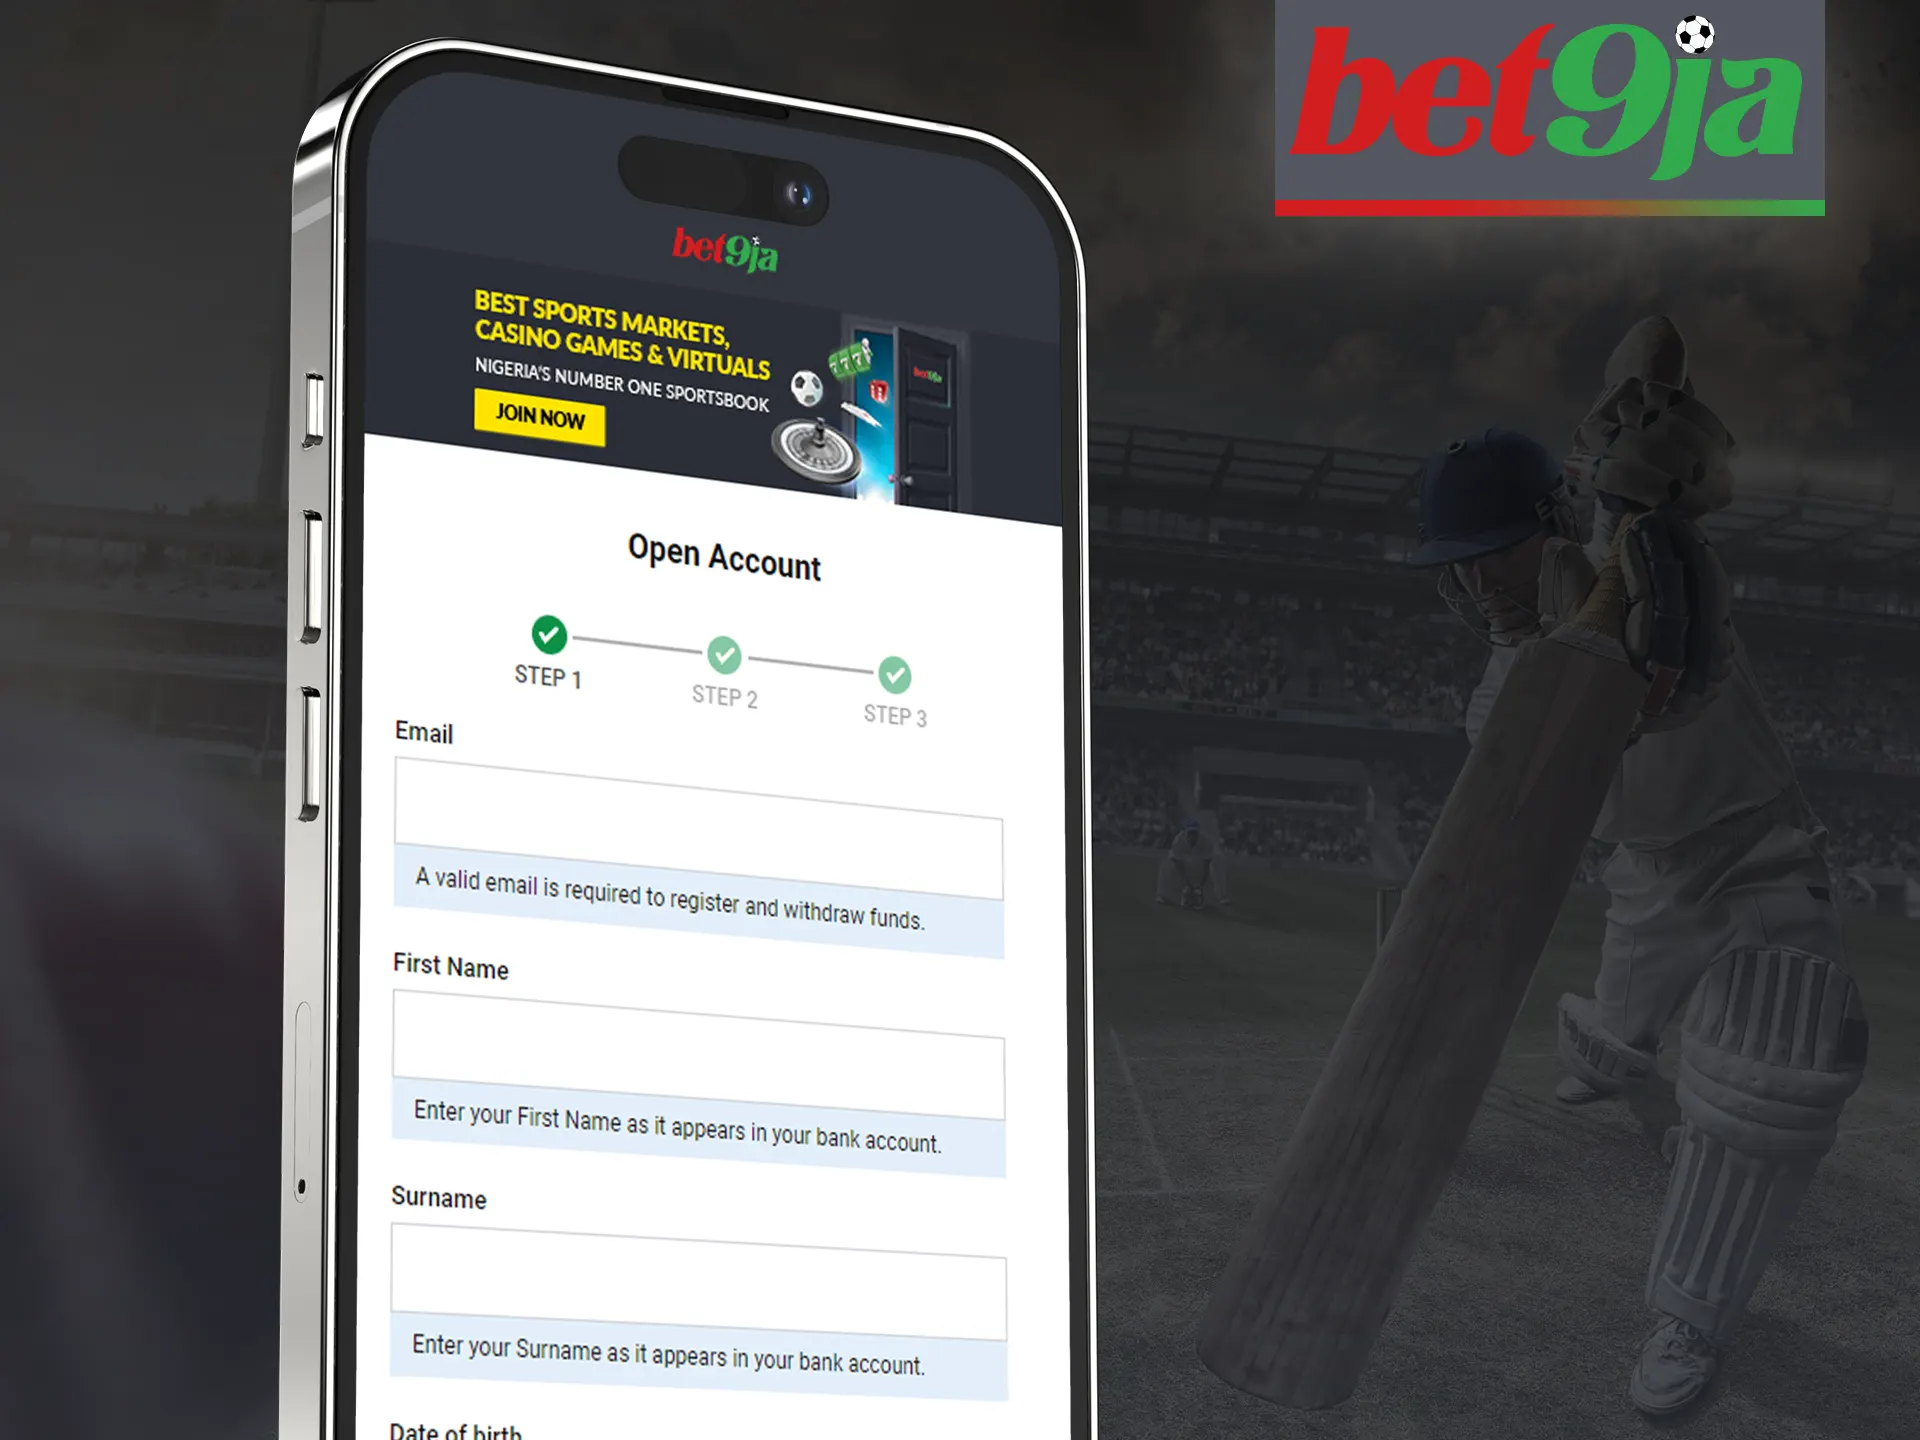 Complete a simple registration in the Bet9ja app.